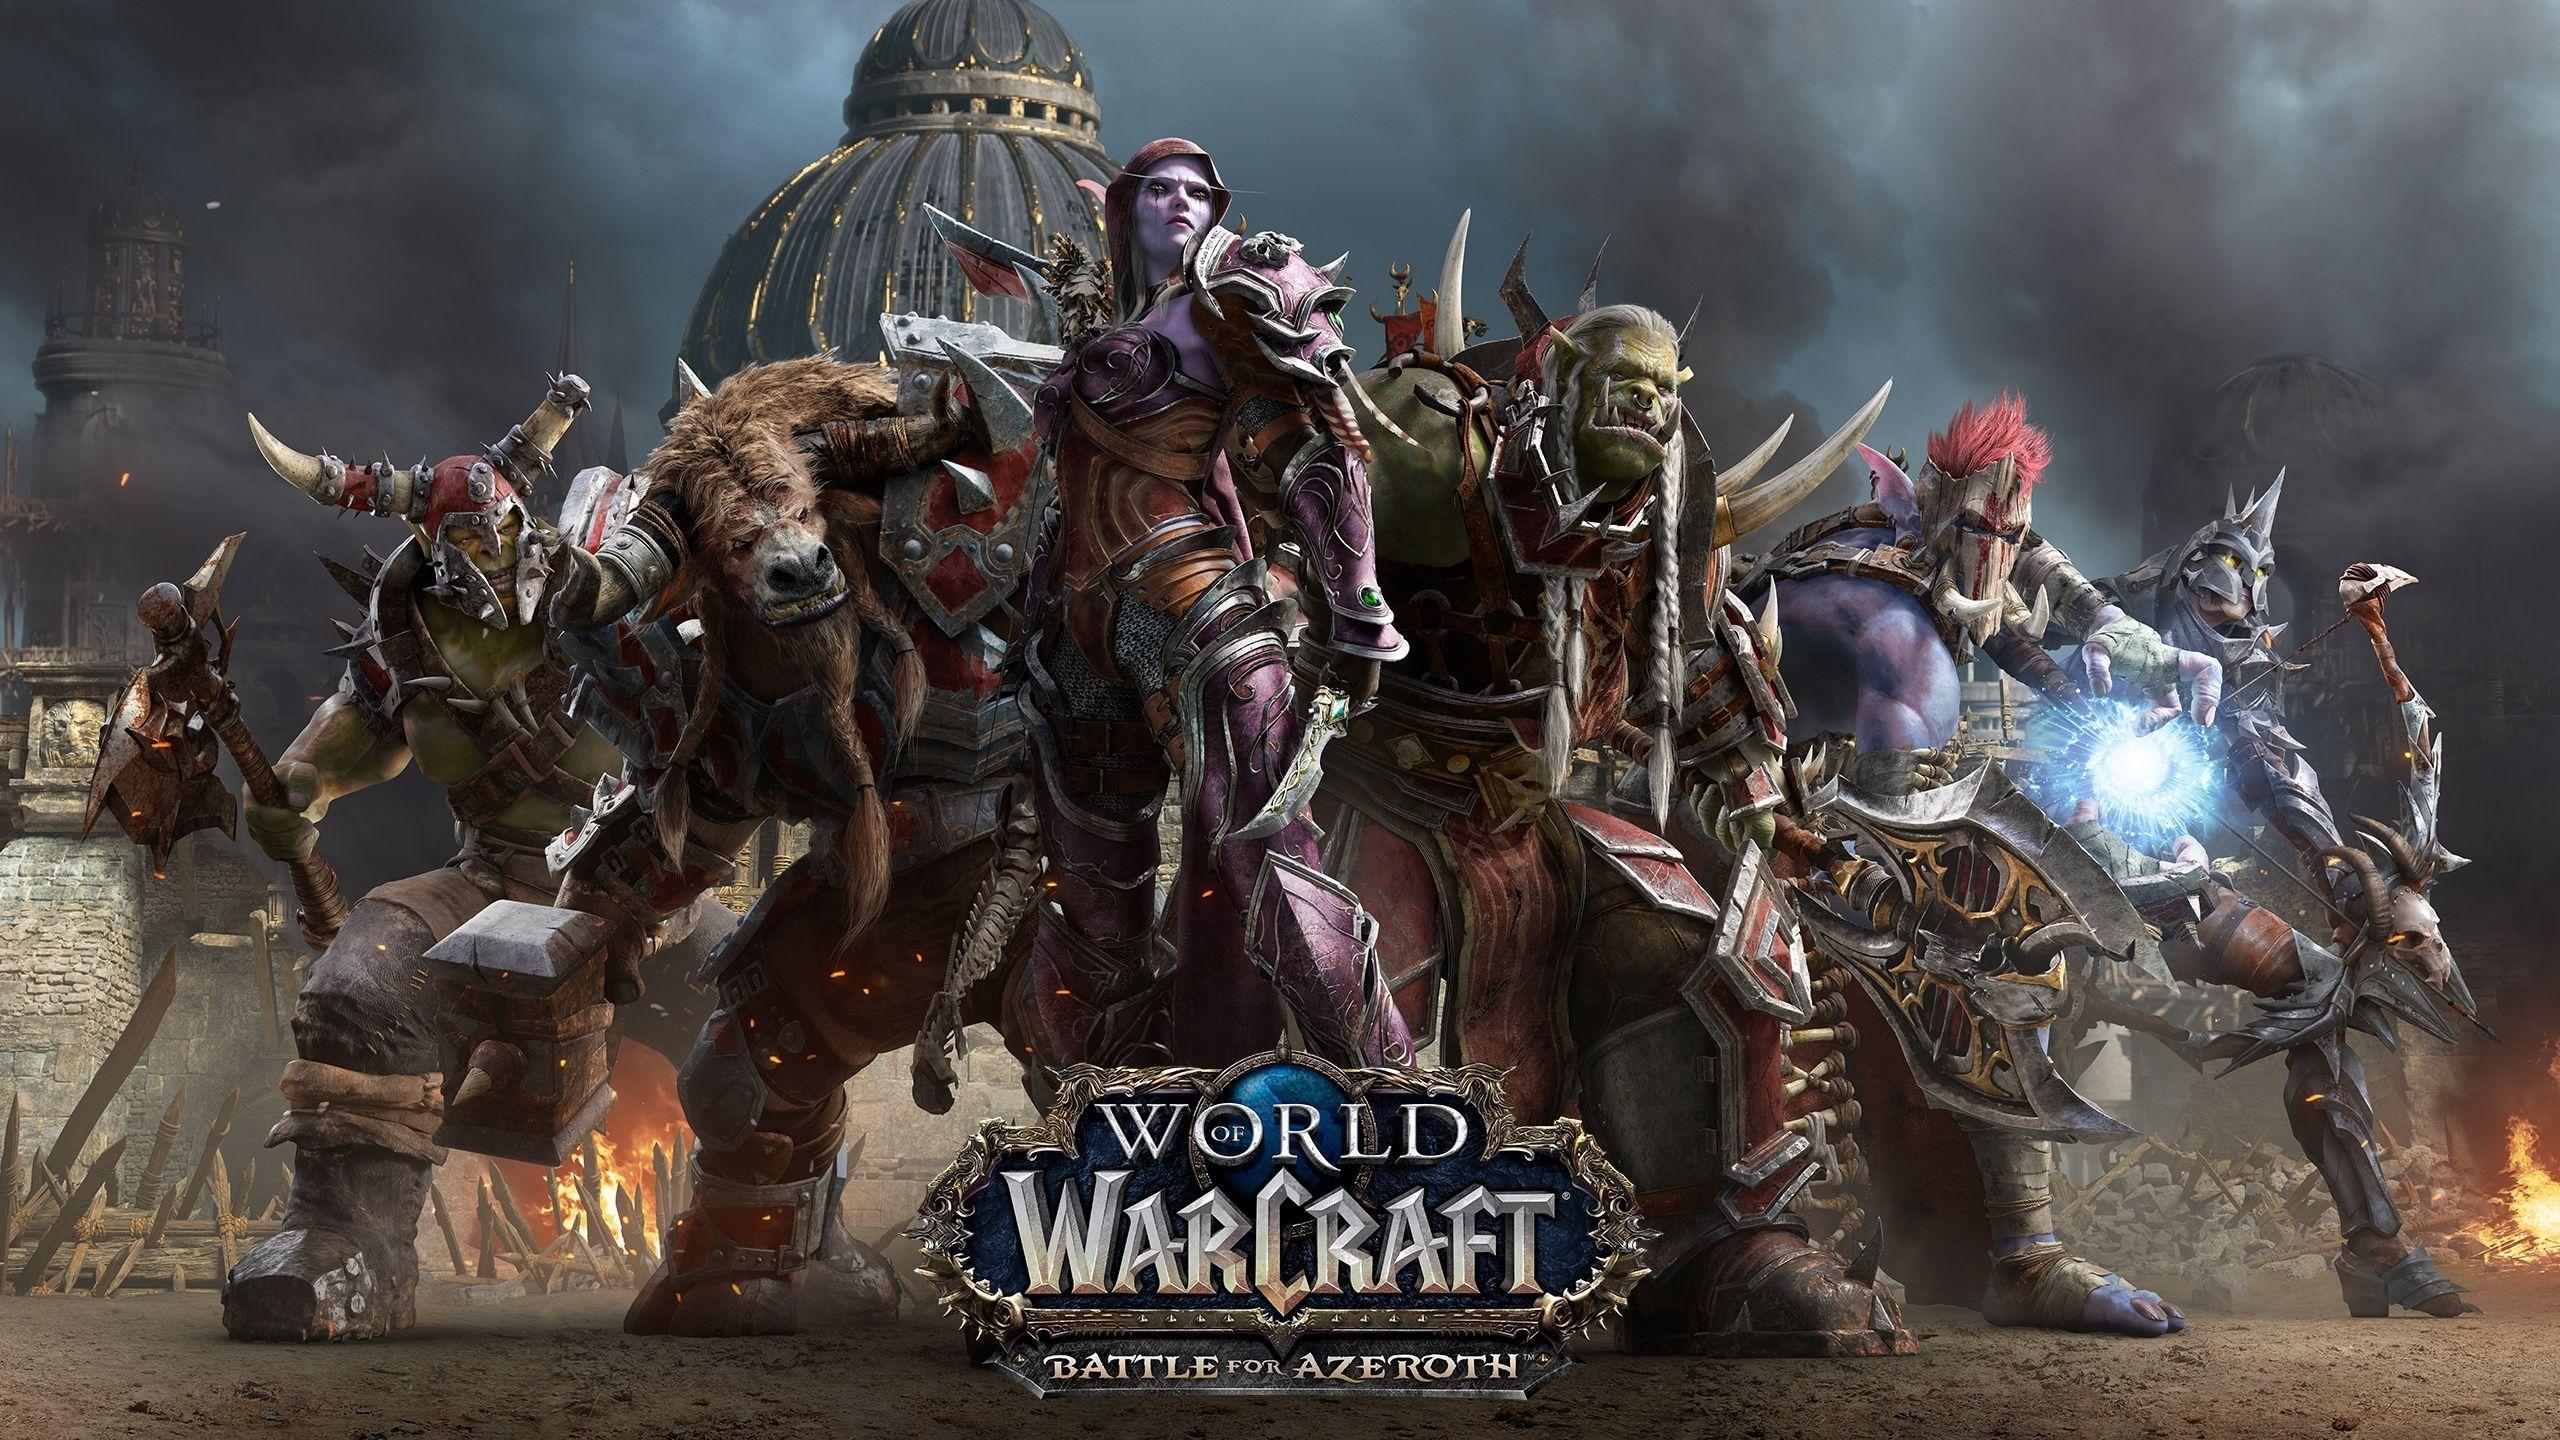 World of Warcraft: Battle for Azeroth HD Wallpaper. Background